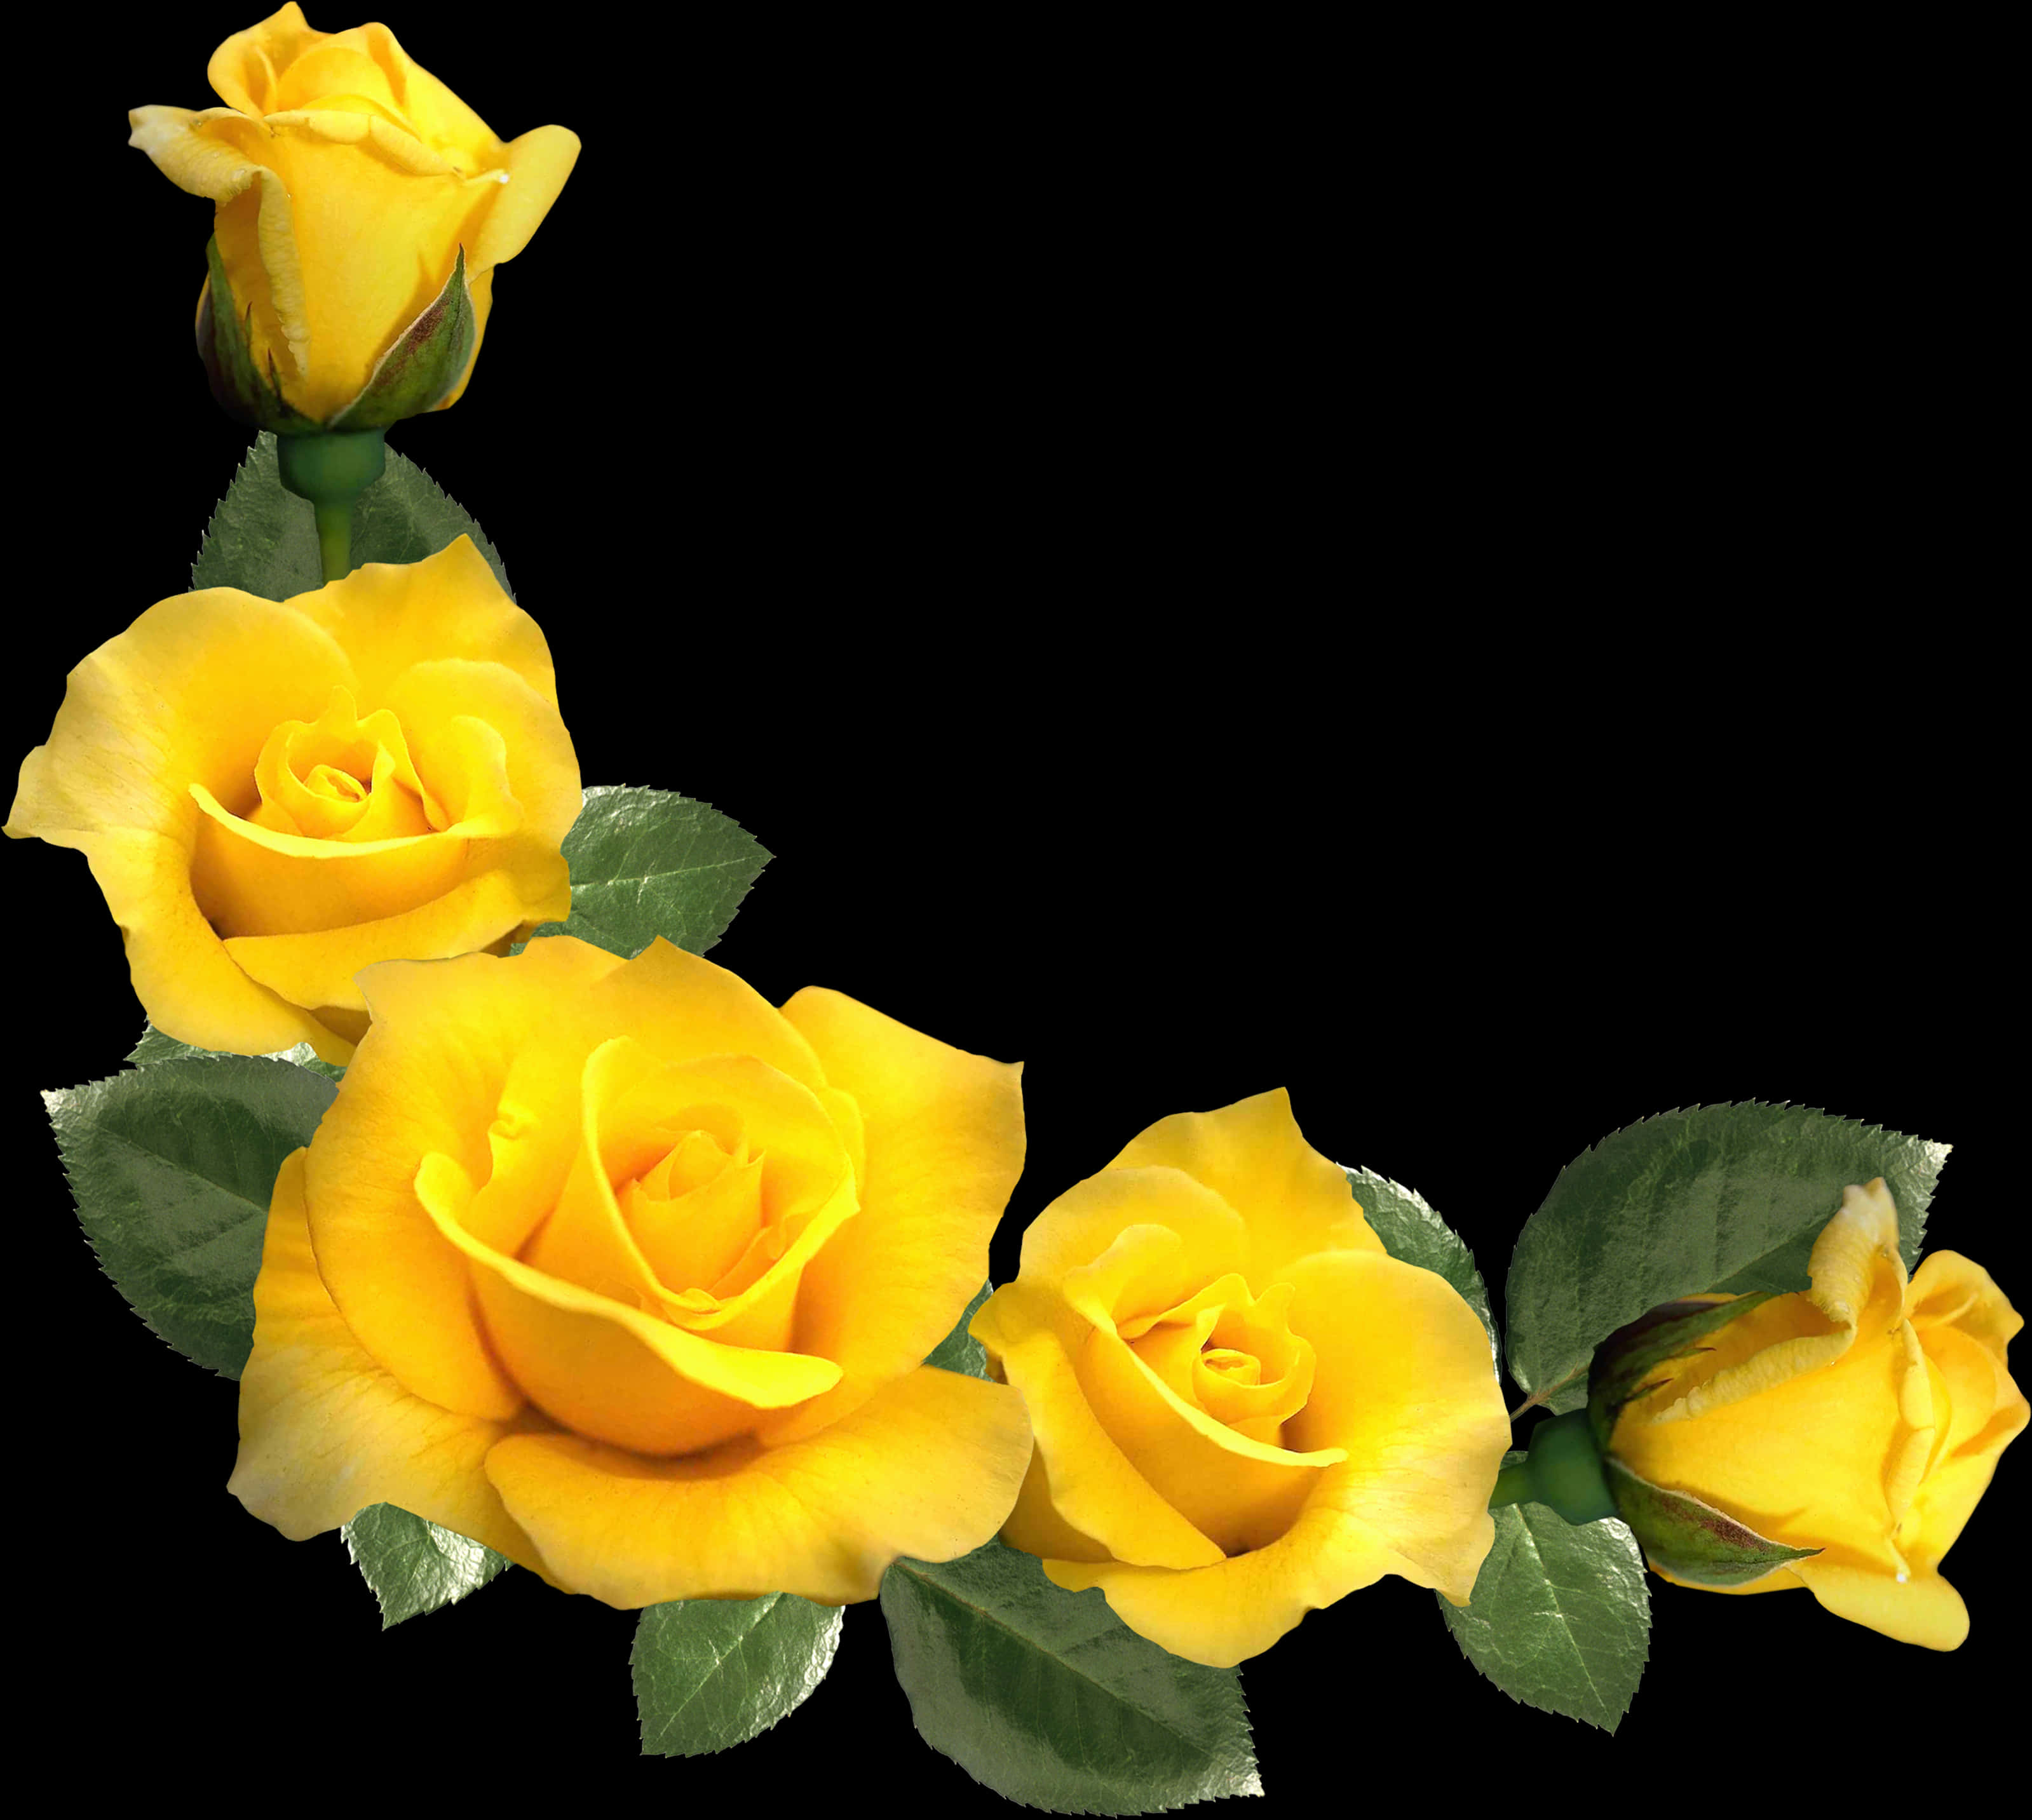 A Group Of Yellow Roses